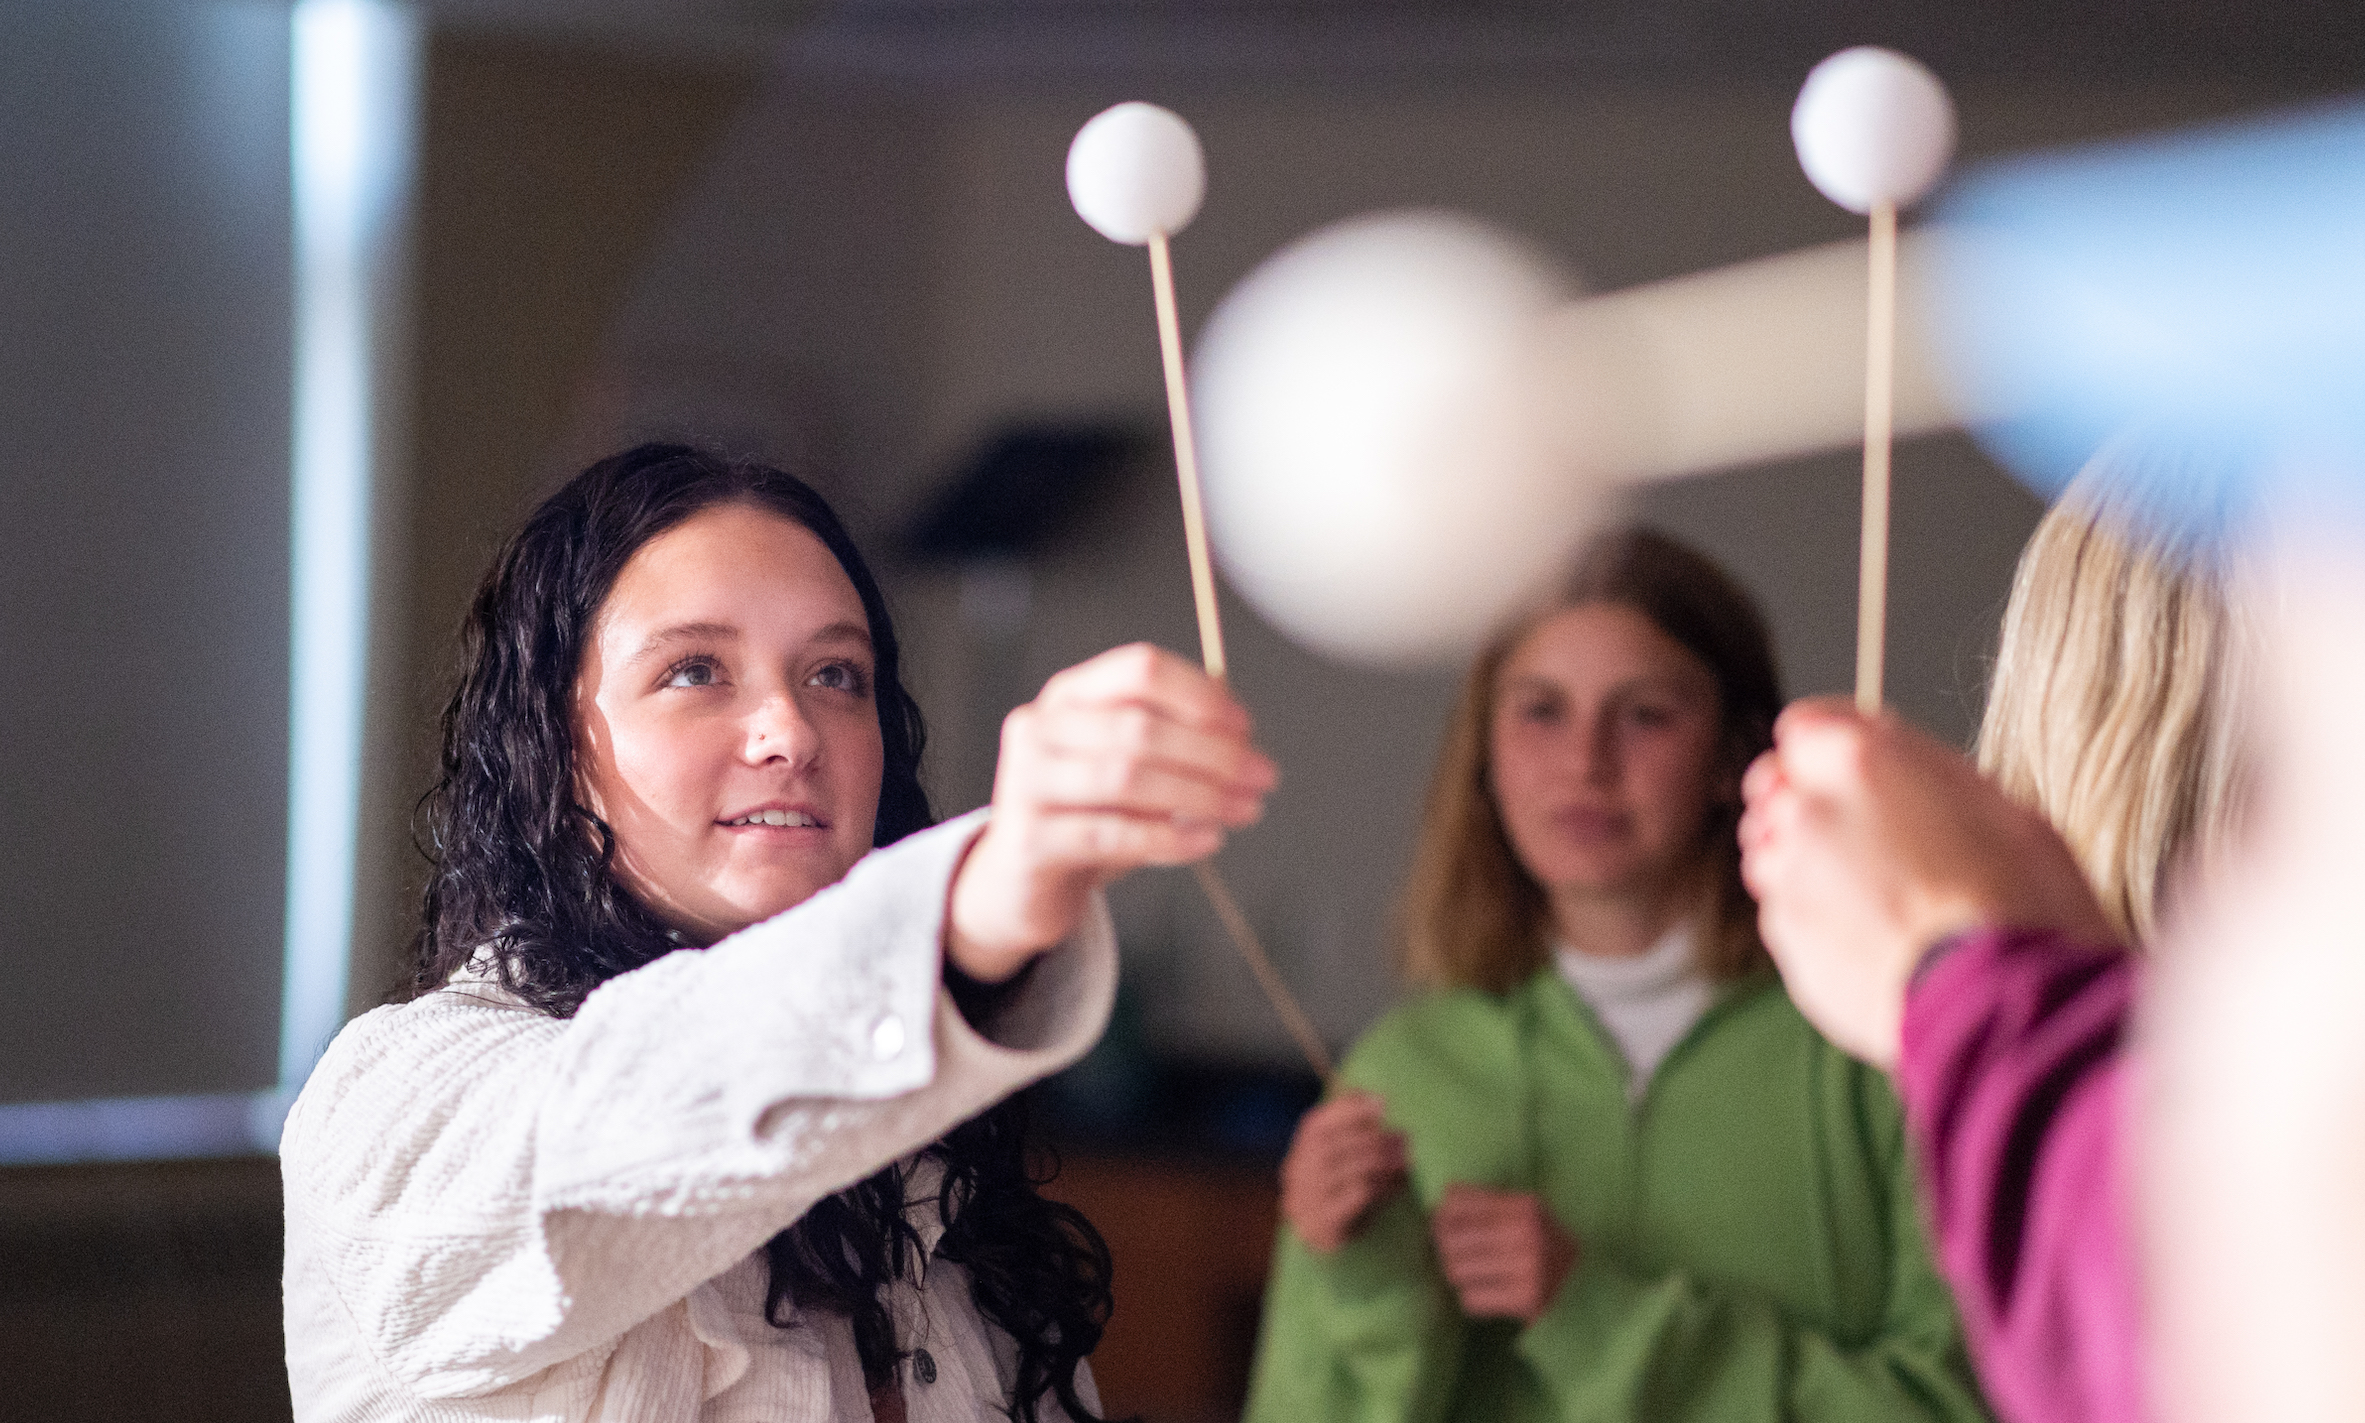 Teaching Science and Environmental Education class doing an exercise with a ball on a stick and lighting to simulate the moon and sun